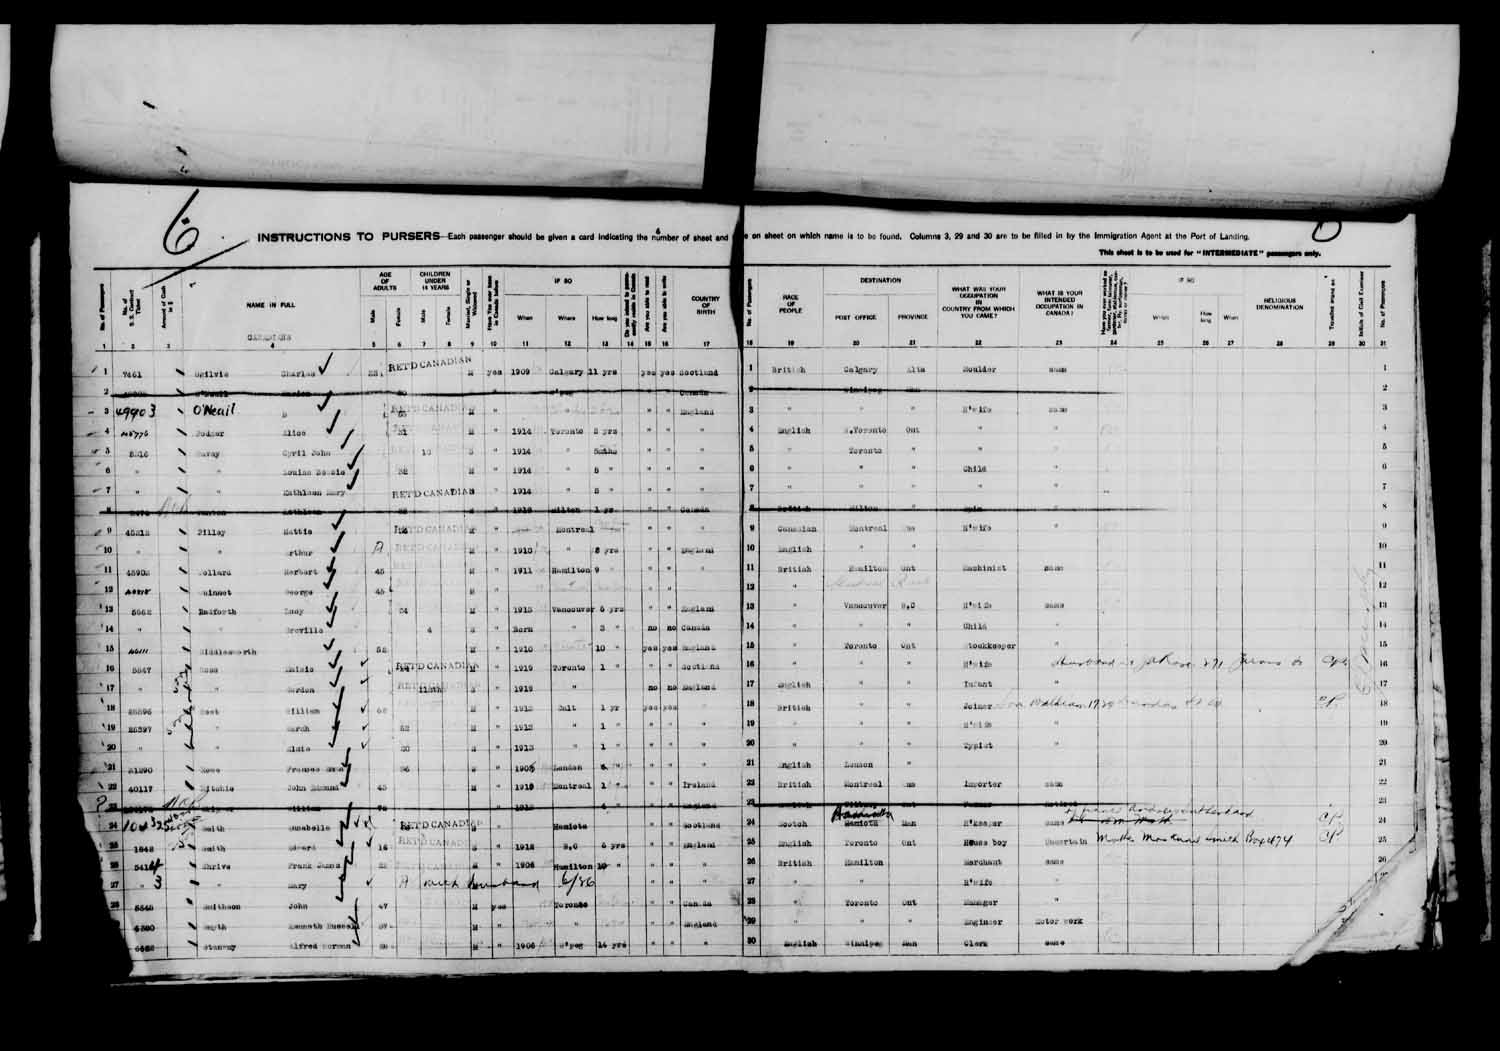 Digitized page of Passenger Lists for Image No.: e003610613